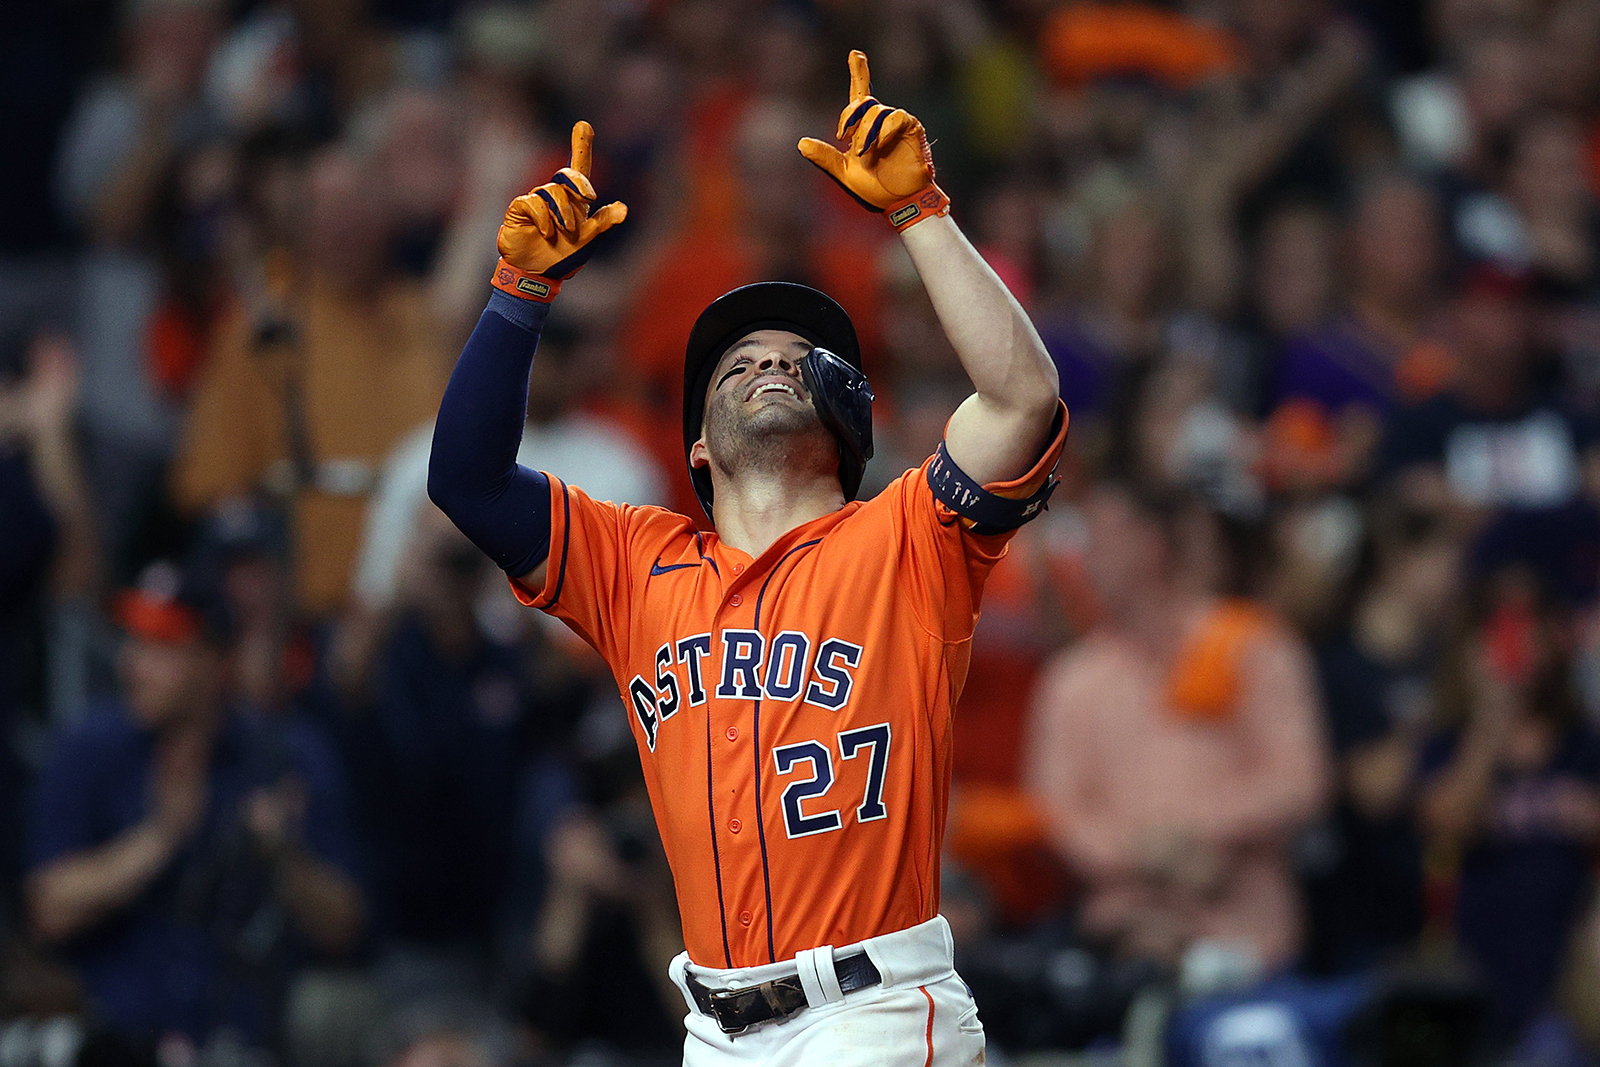 Jose Altuve of the Houston Astros celebrates after hitting a one run home run against the Atlanta Braves during the seventh inning.